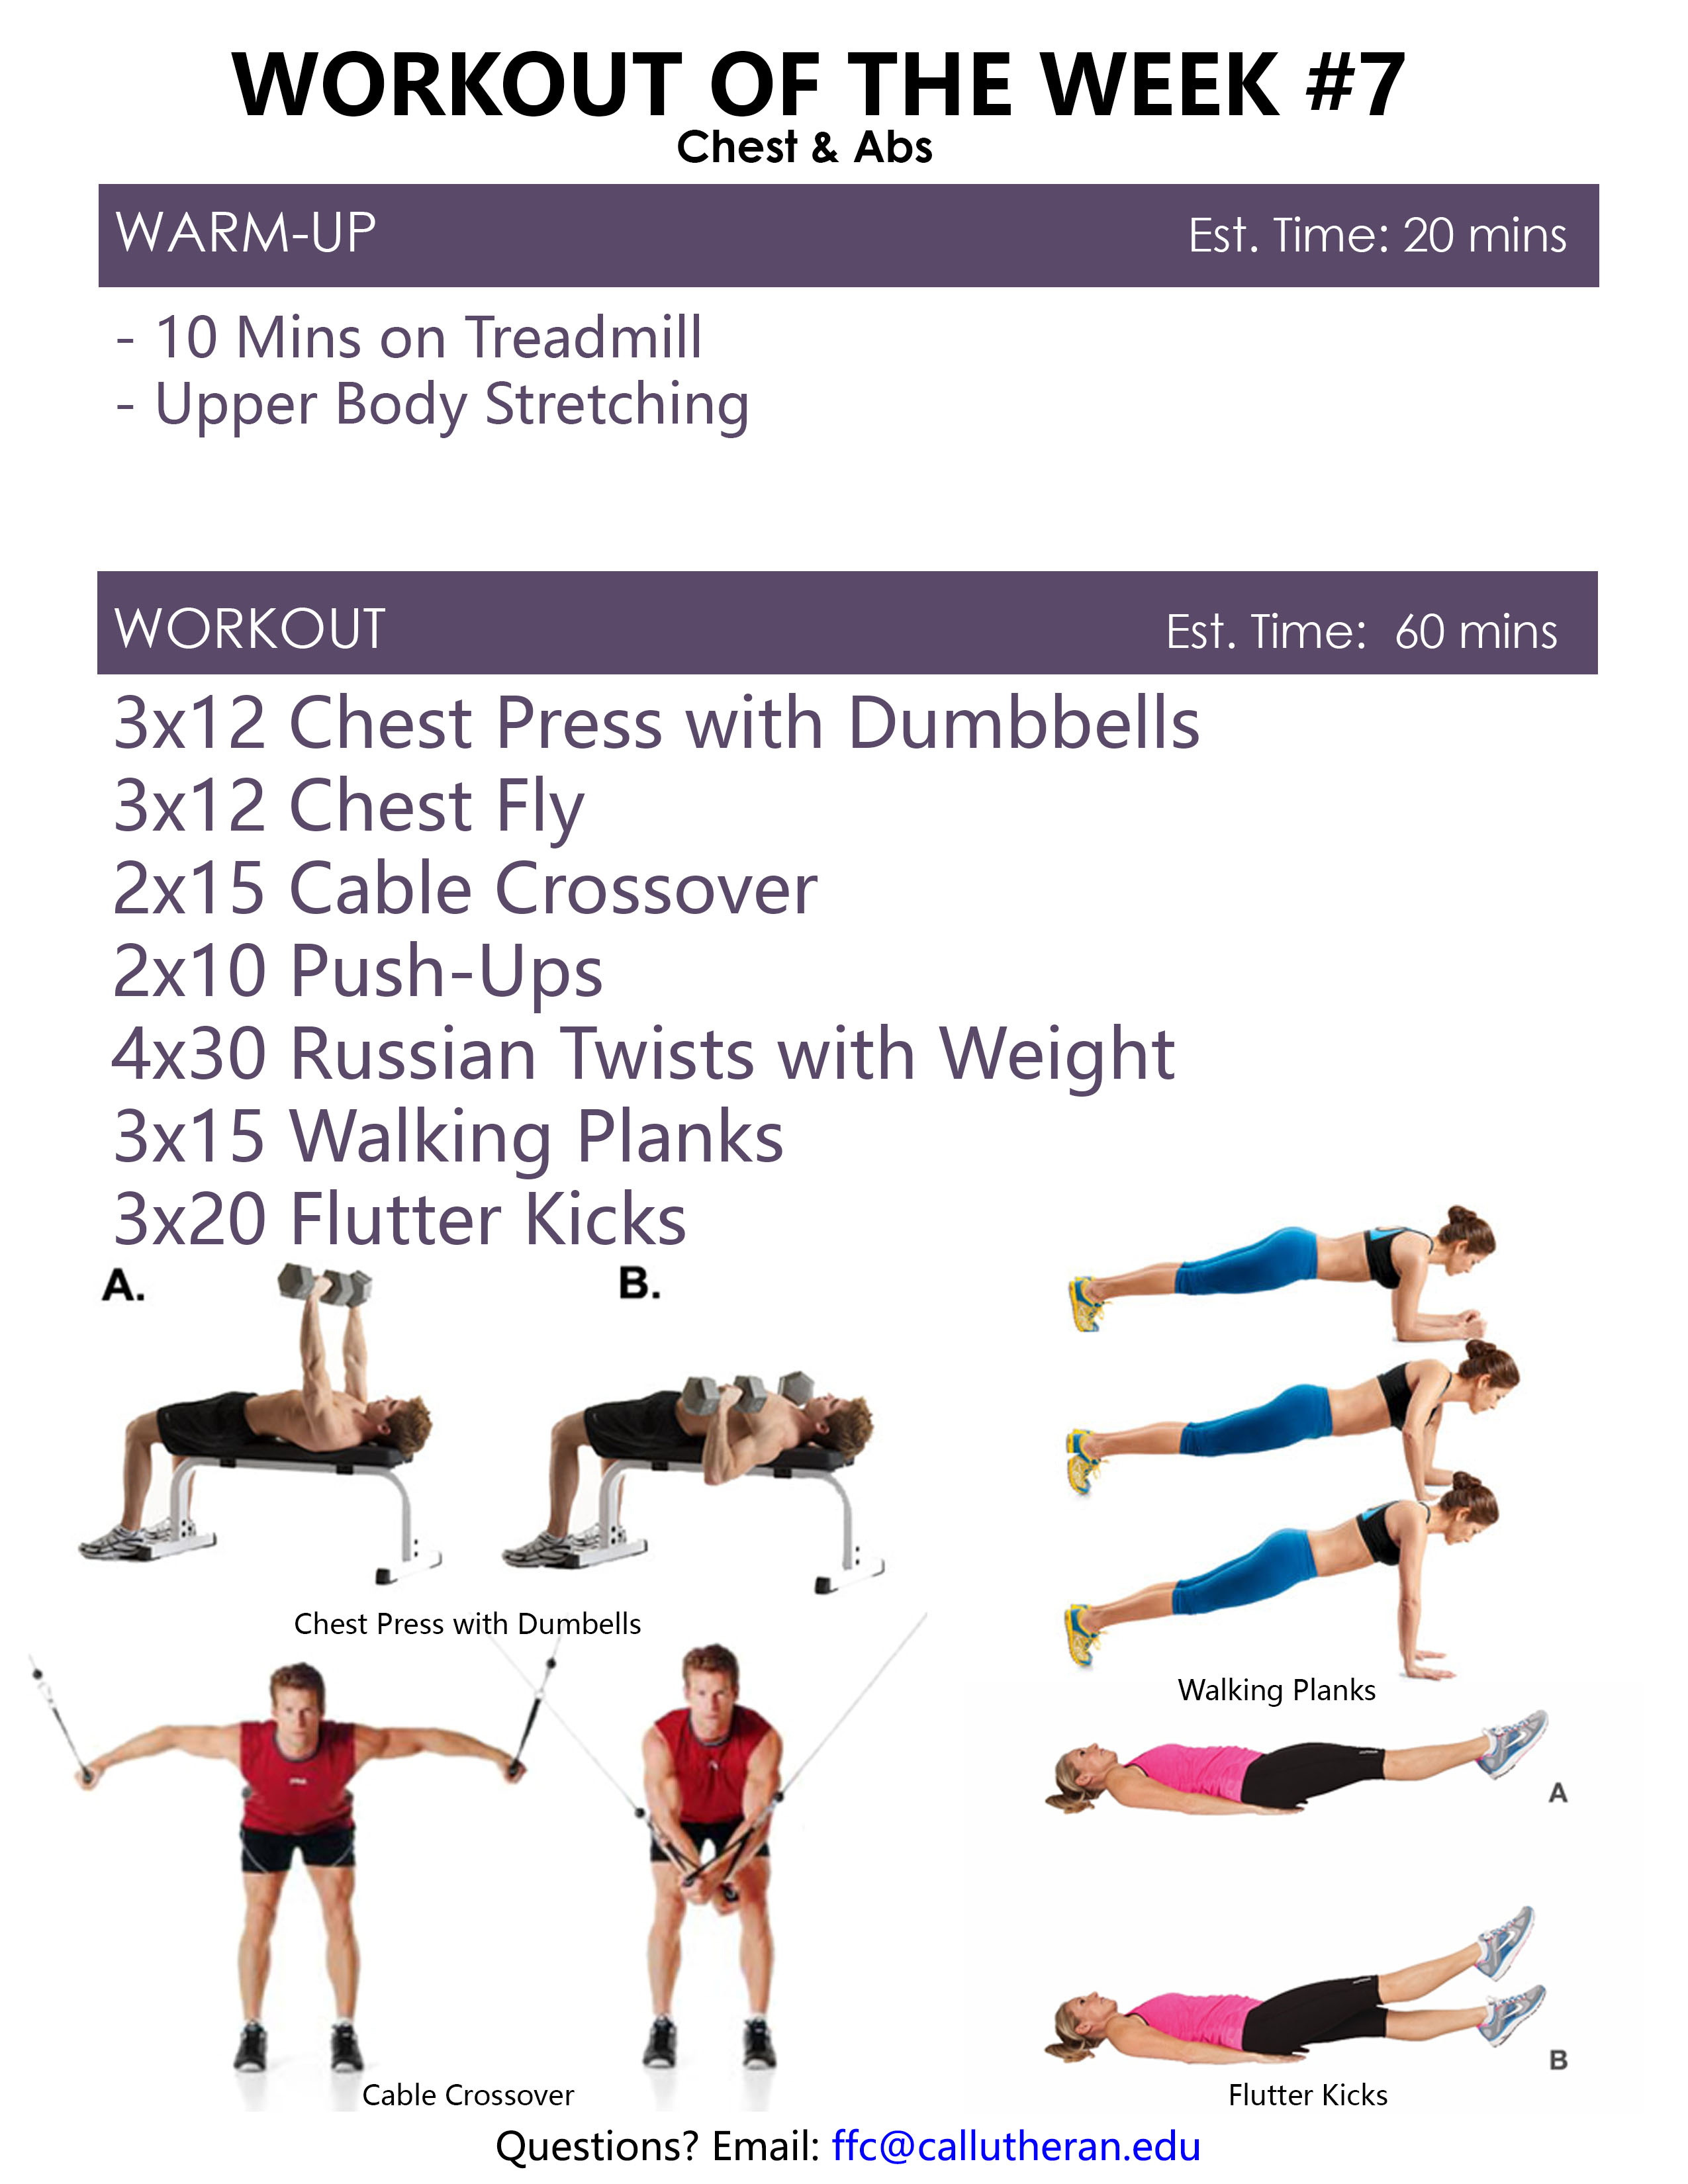 4 WEEK WORKOUT JOURNAL- FIT CHRONICLES – finefitsisters